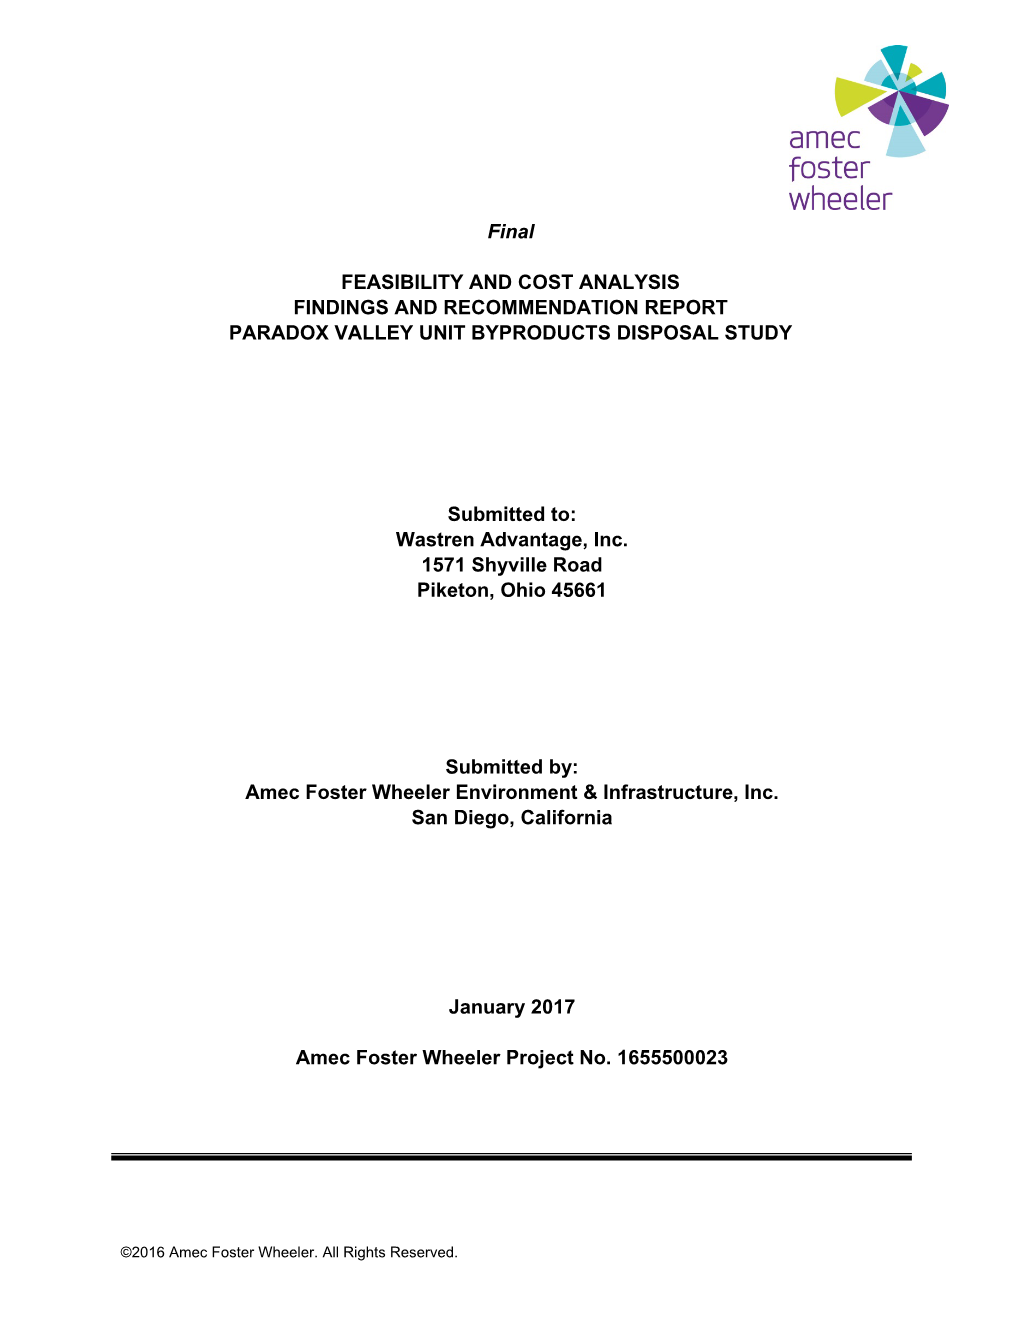 Final Feasibility and Cost Analysis Findings and Recommendations Report